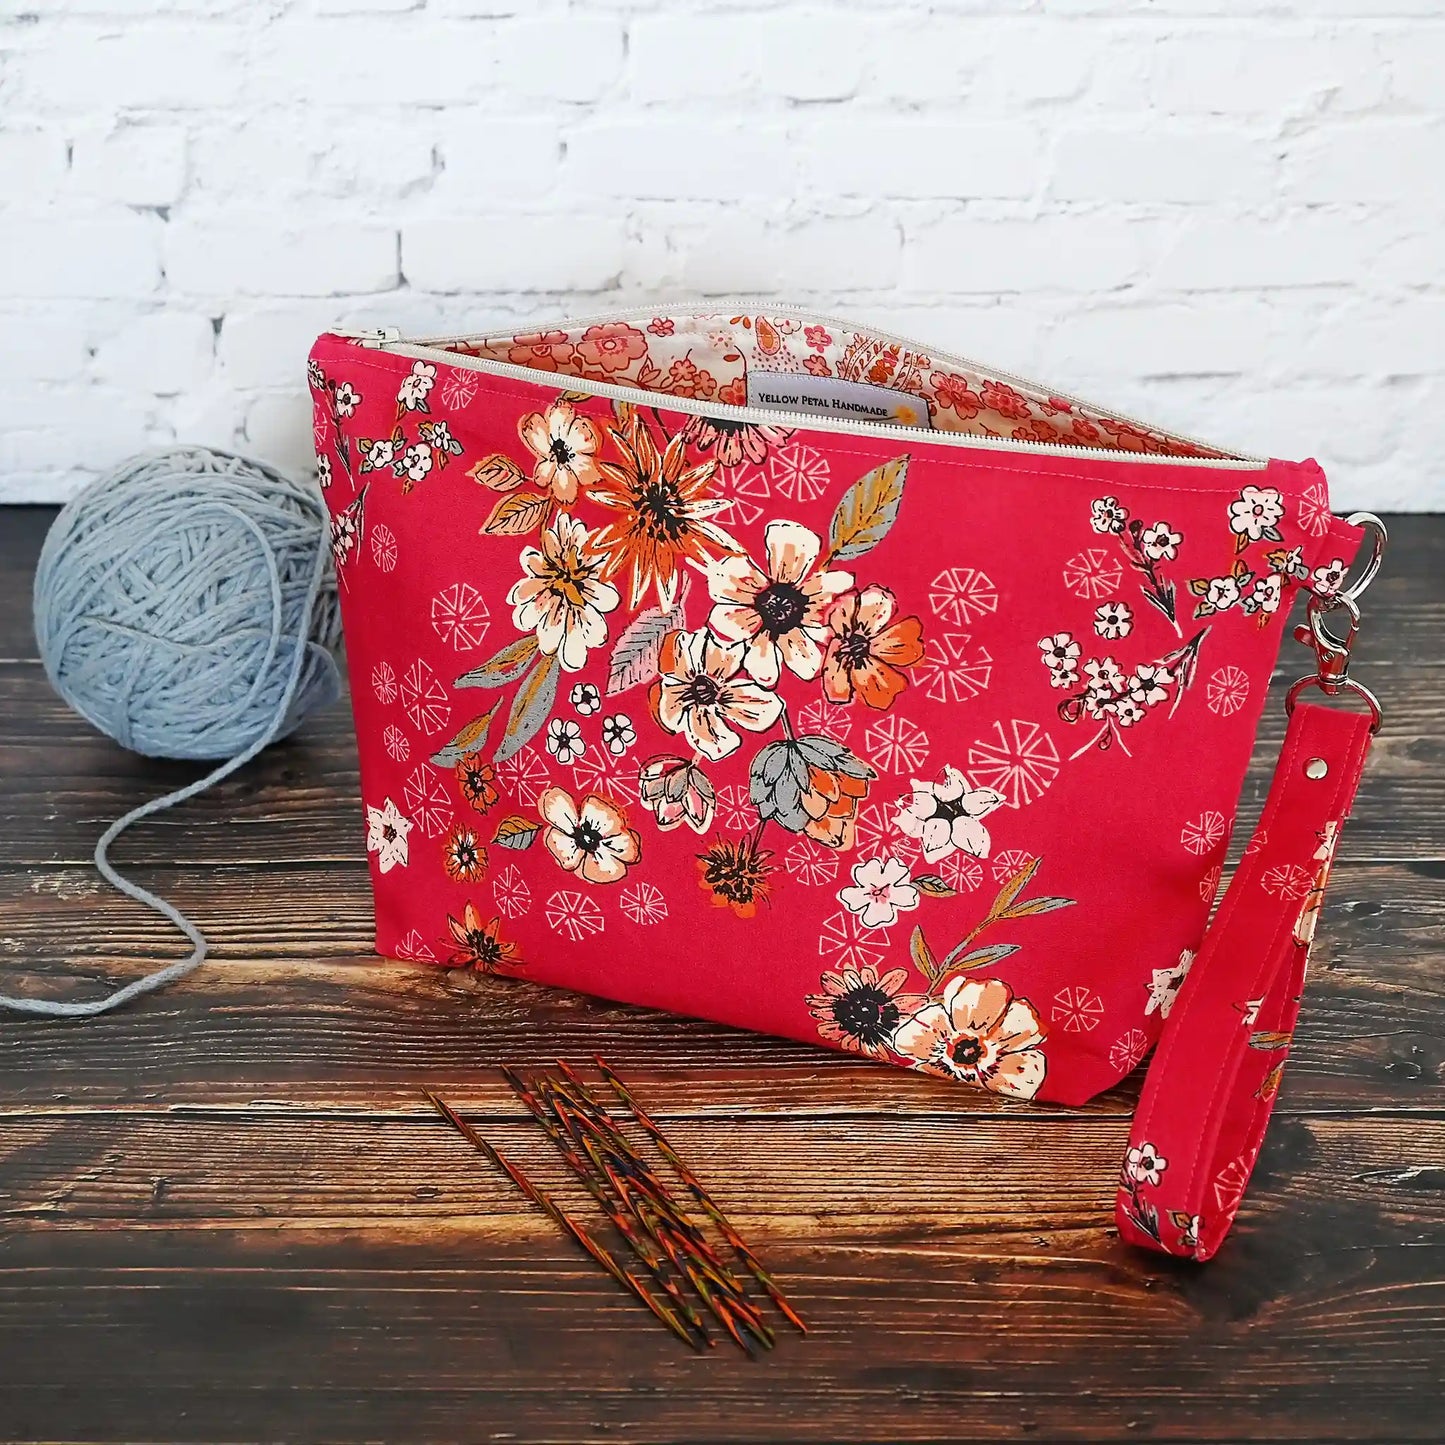 Red floral zippered pouch made from a gorgeous premium cotton from Art Gallery Fabrics.  Lined in a pretty cream and coral paisley floral and comes with a removable wrist strap.  Made in Canada by Yellow Petal Handmade.